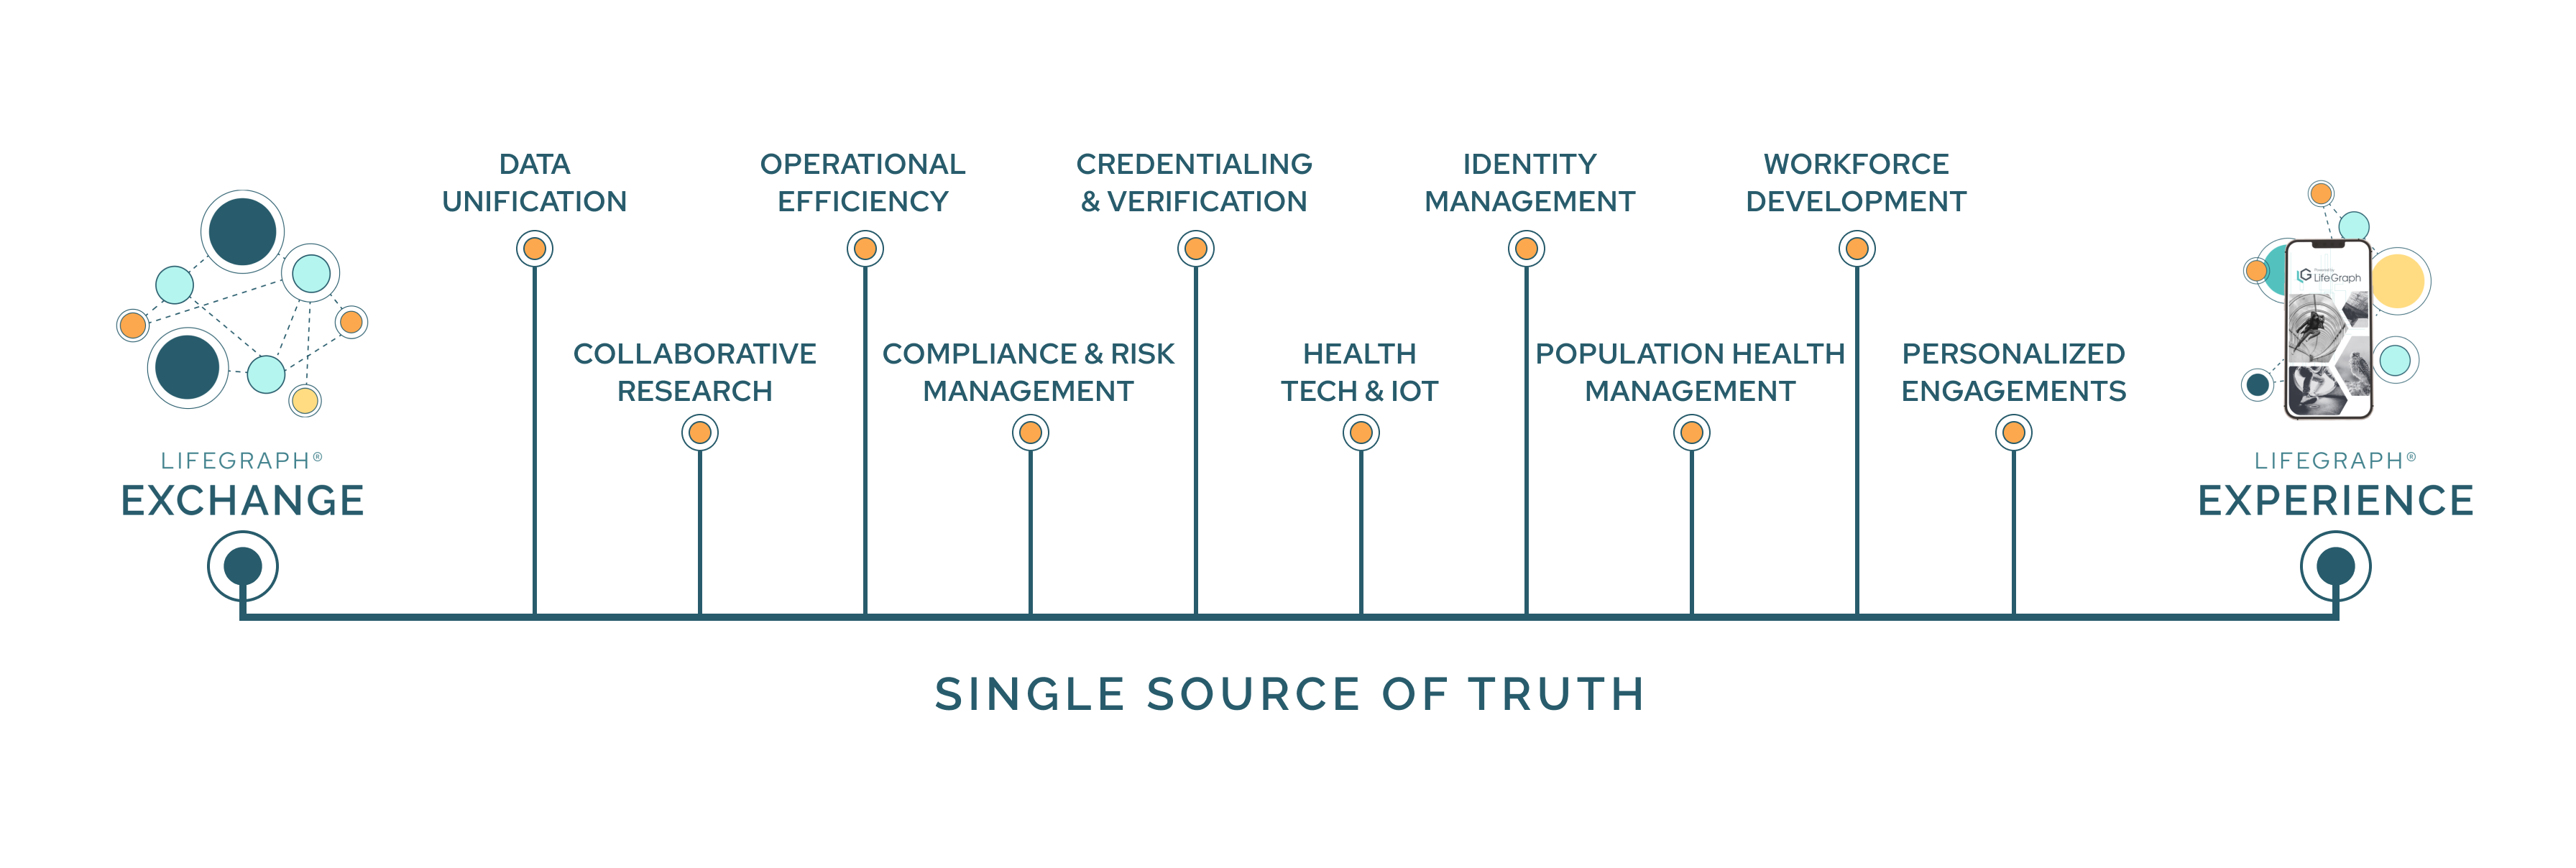 Single Source of Truth - LG Exchanges & LG Experiences